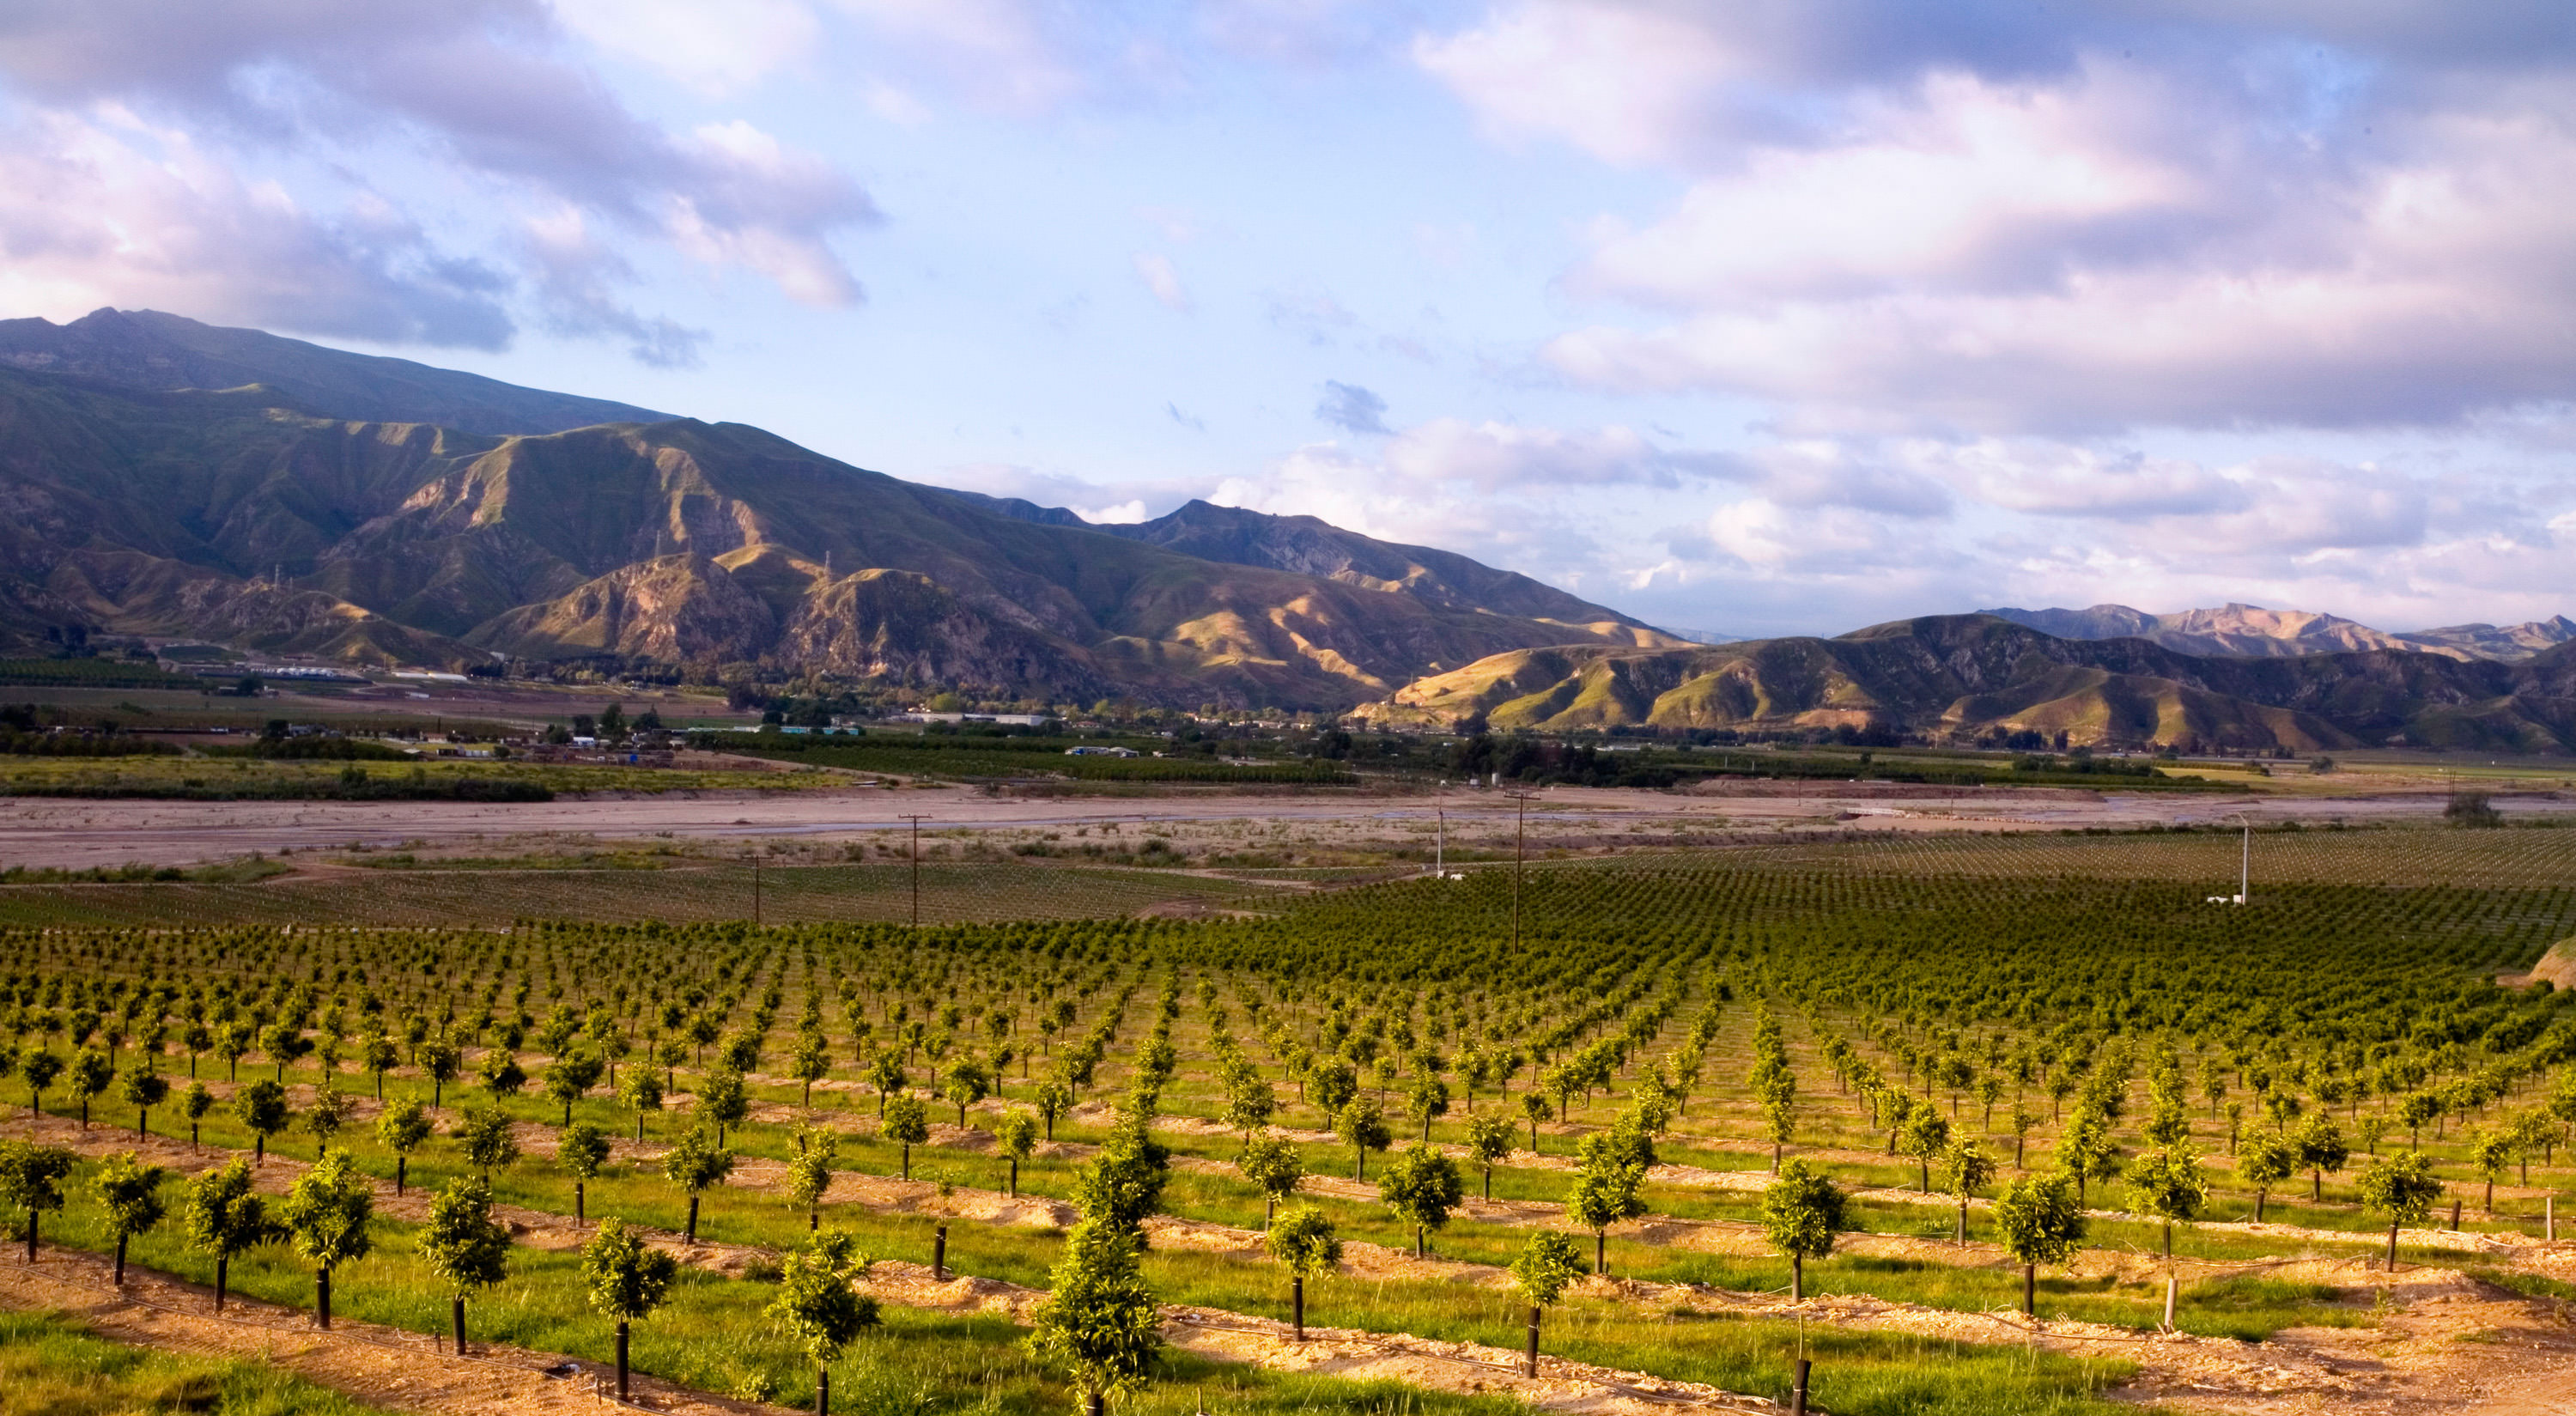 A large vineyard with mountains in the background.